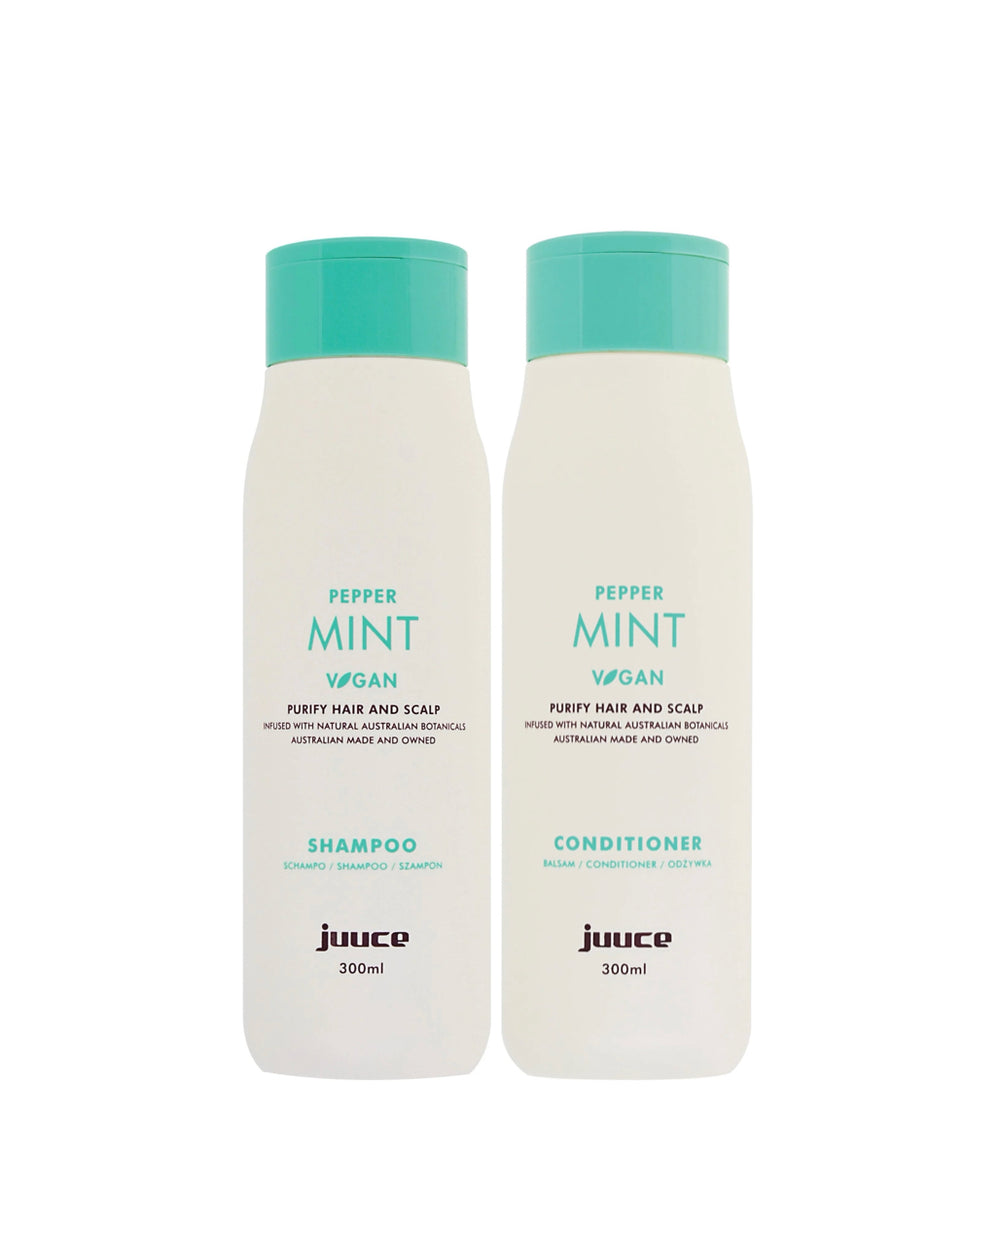 Juuce Pepper MINT Shampoo and Conditioner 2x300ml